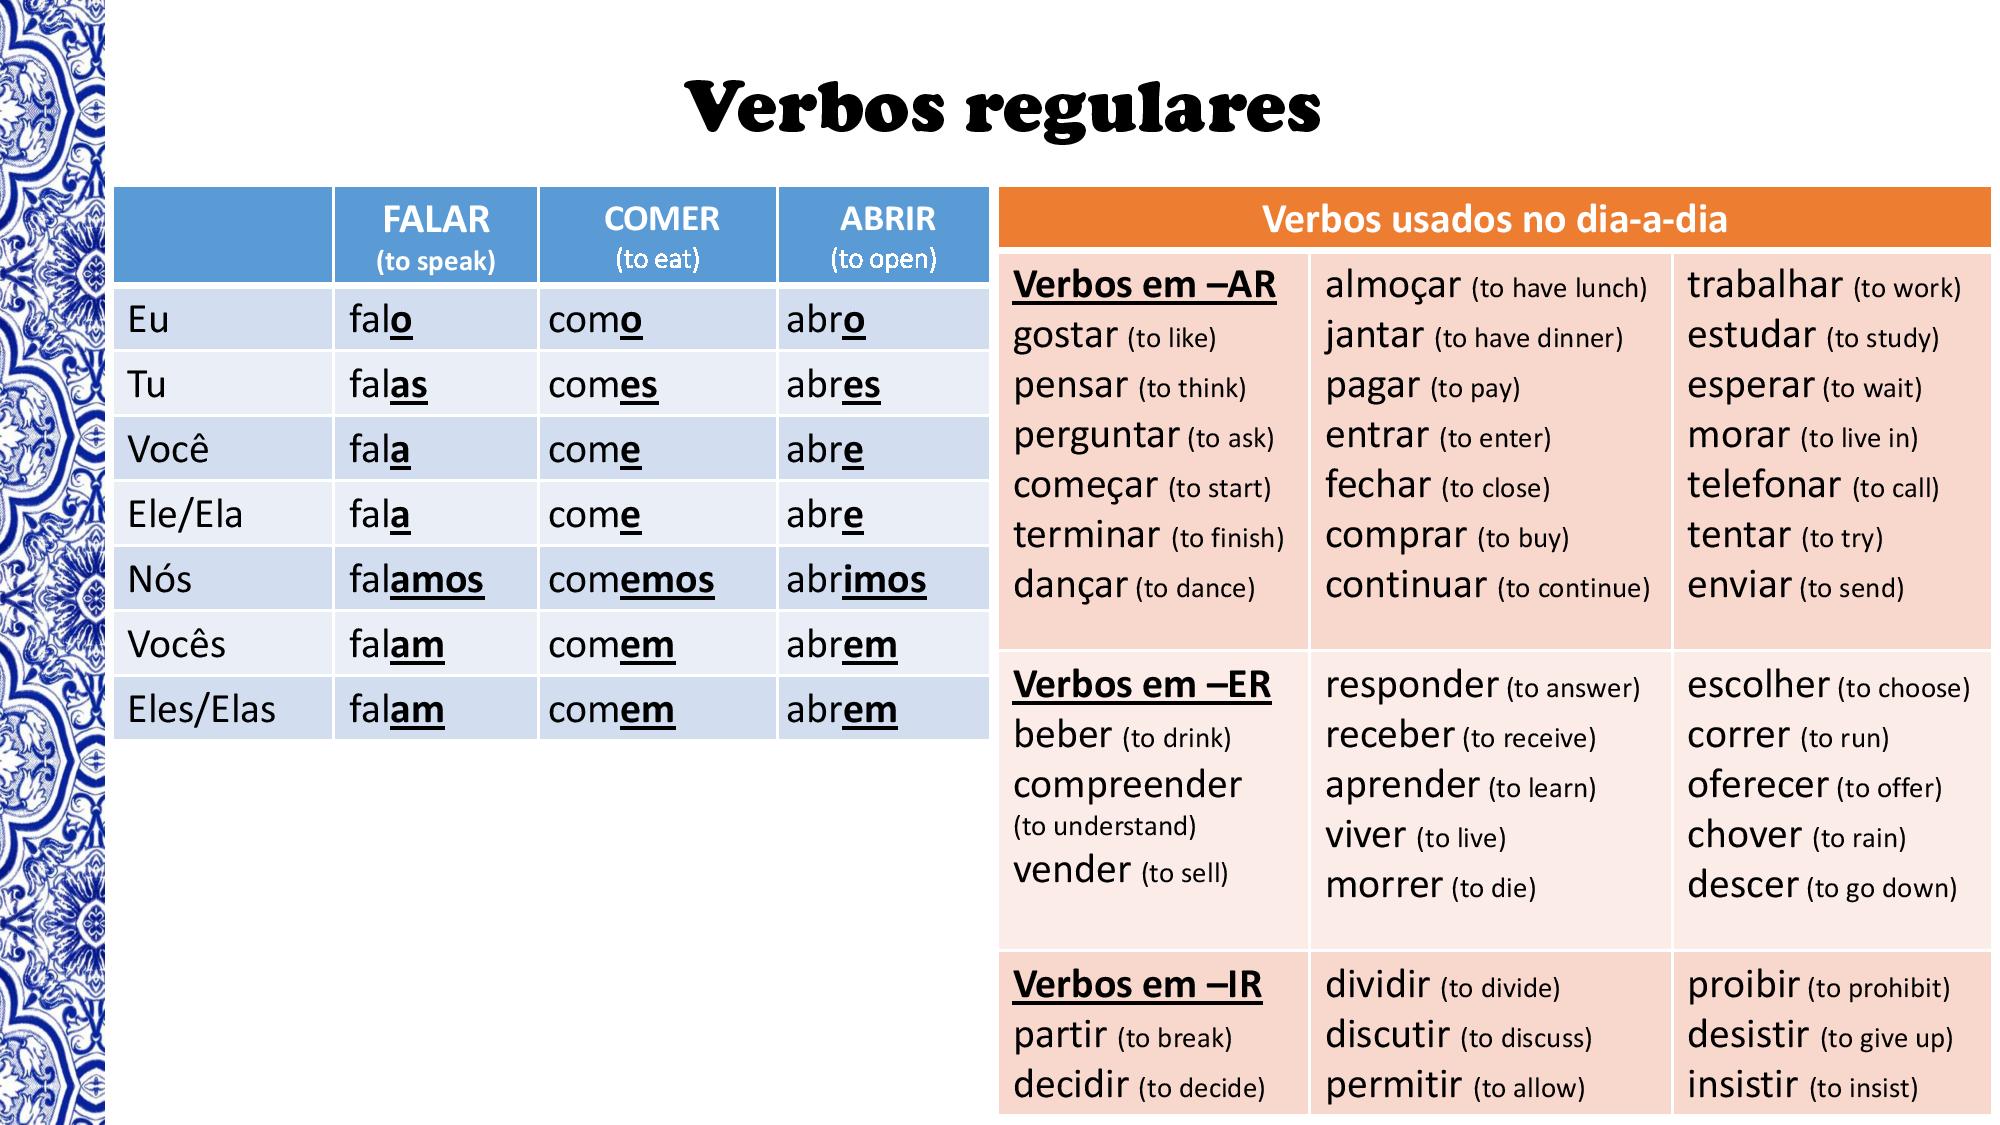 Different uses of the verb Ficar in Portuguese